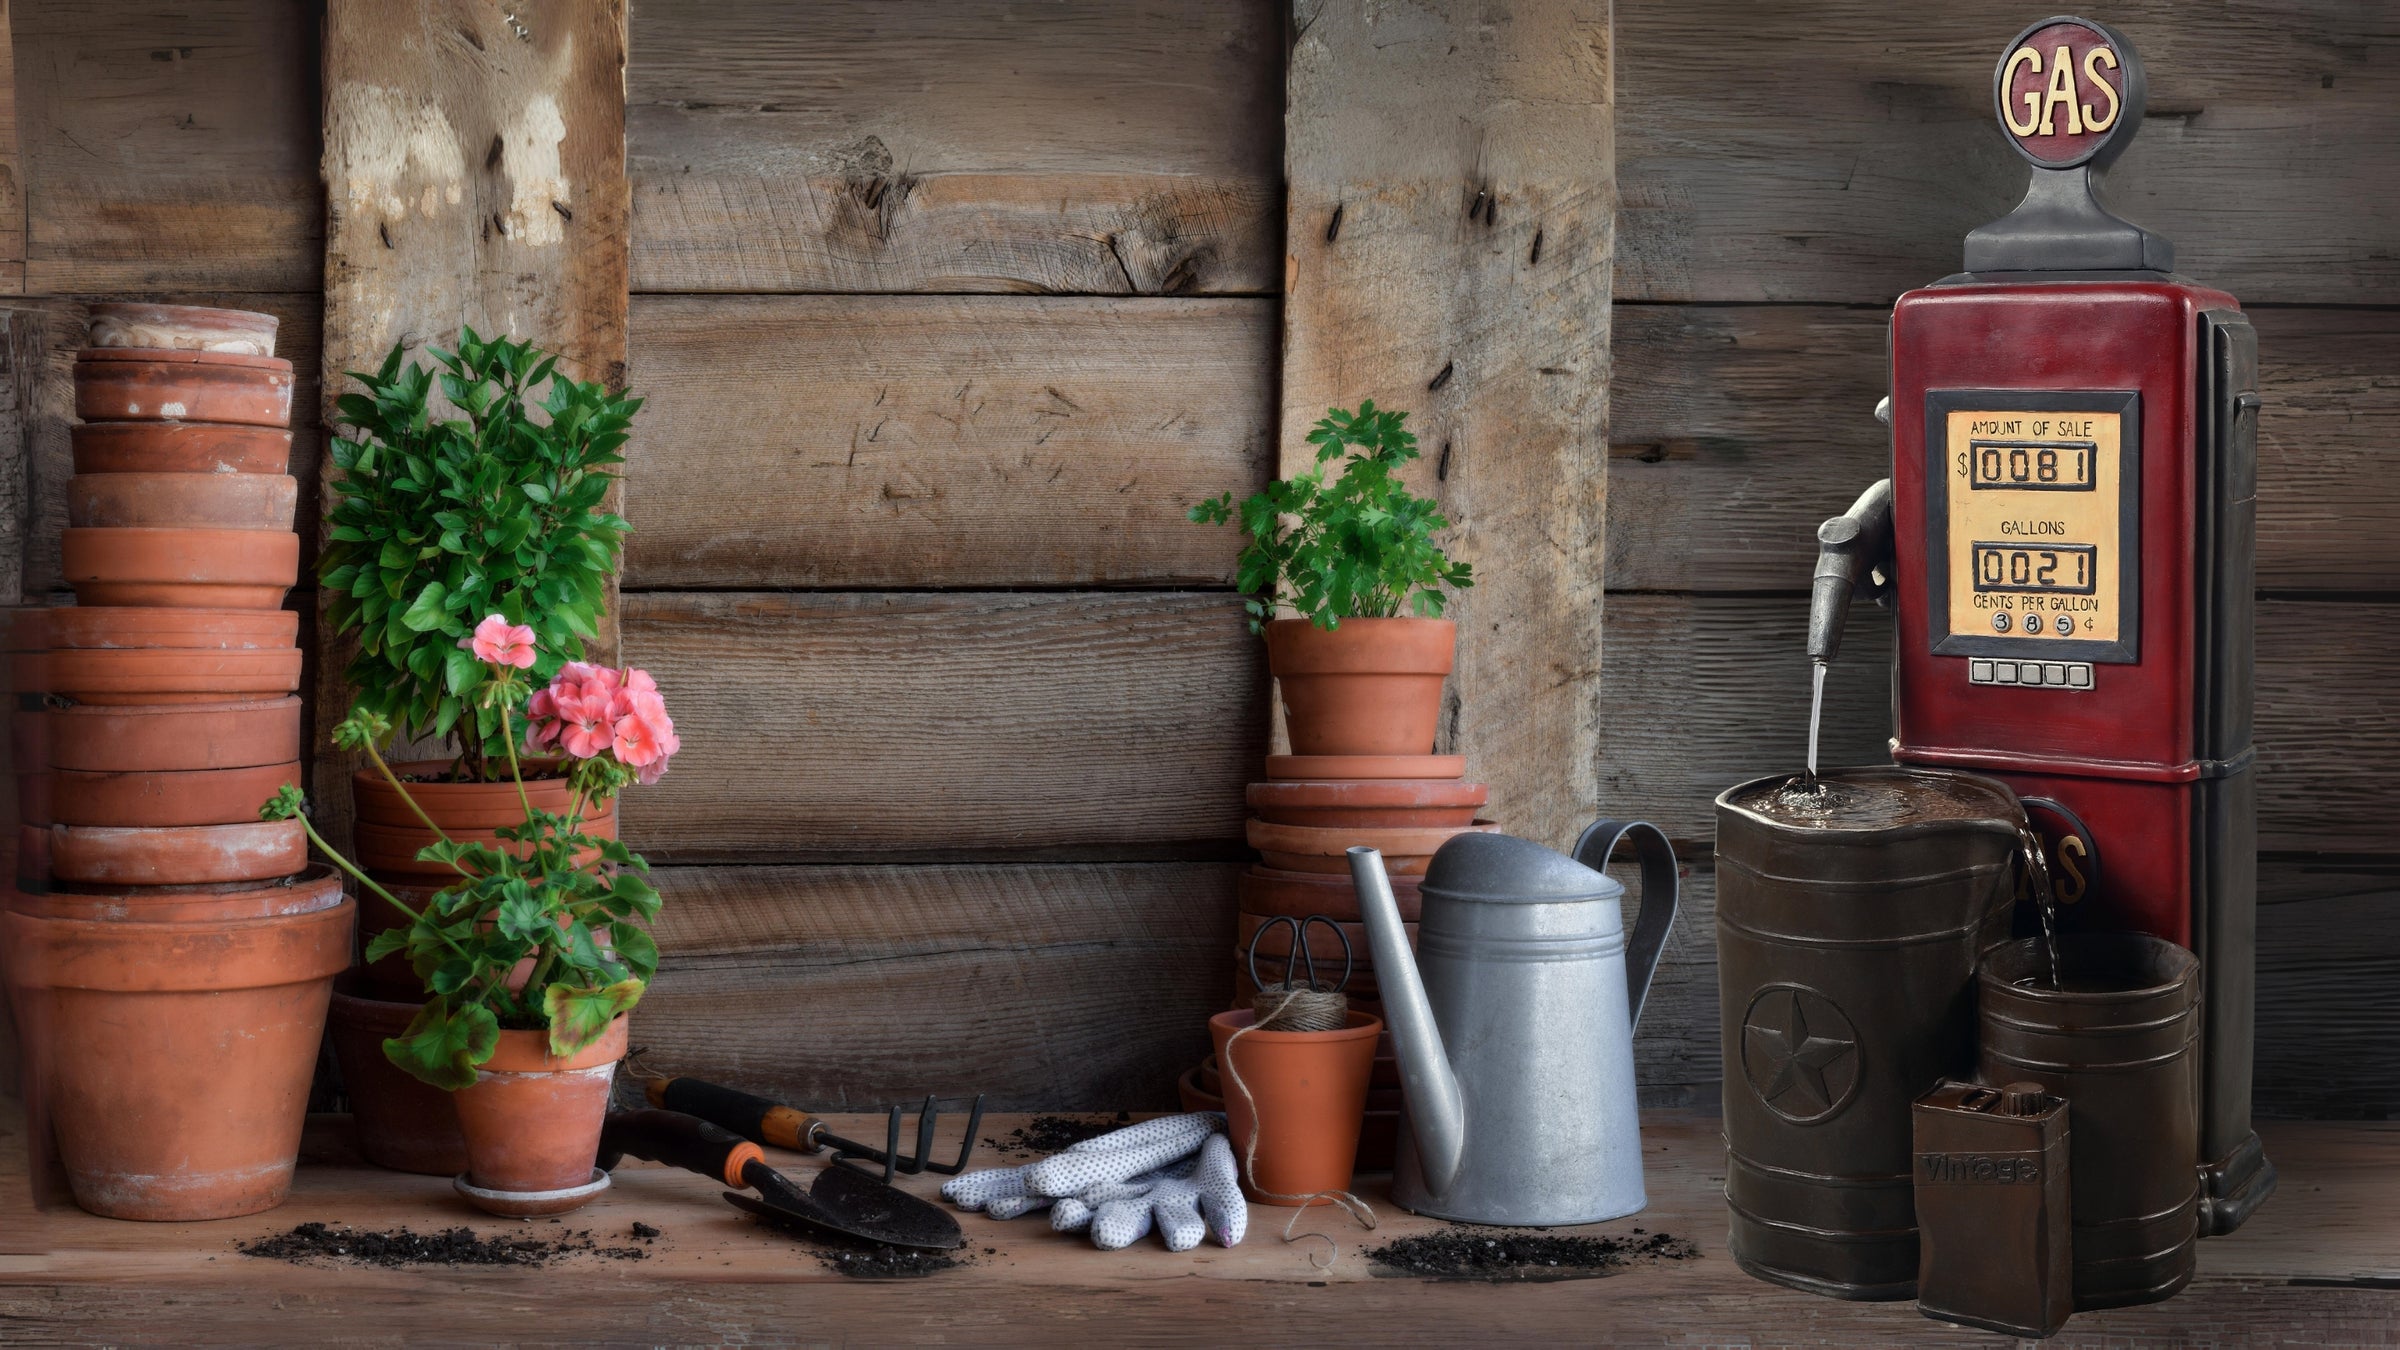 A vintage gas pump-shaped outdoor water fountain, plants and garden tools on a wooden floor